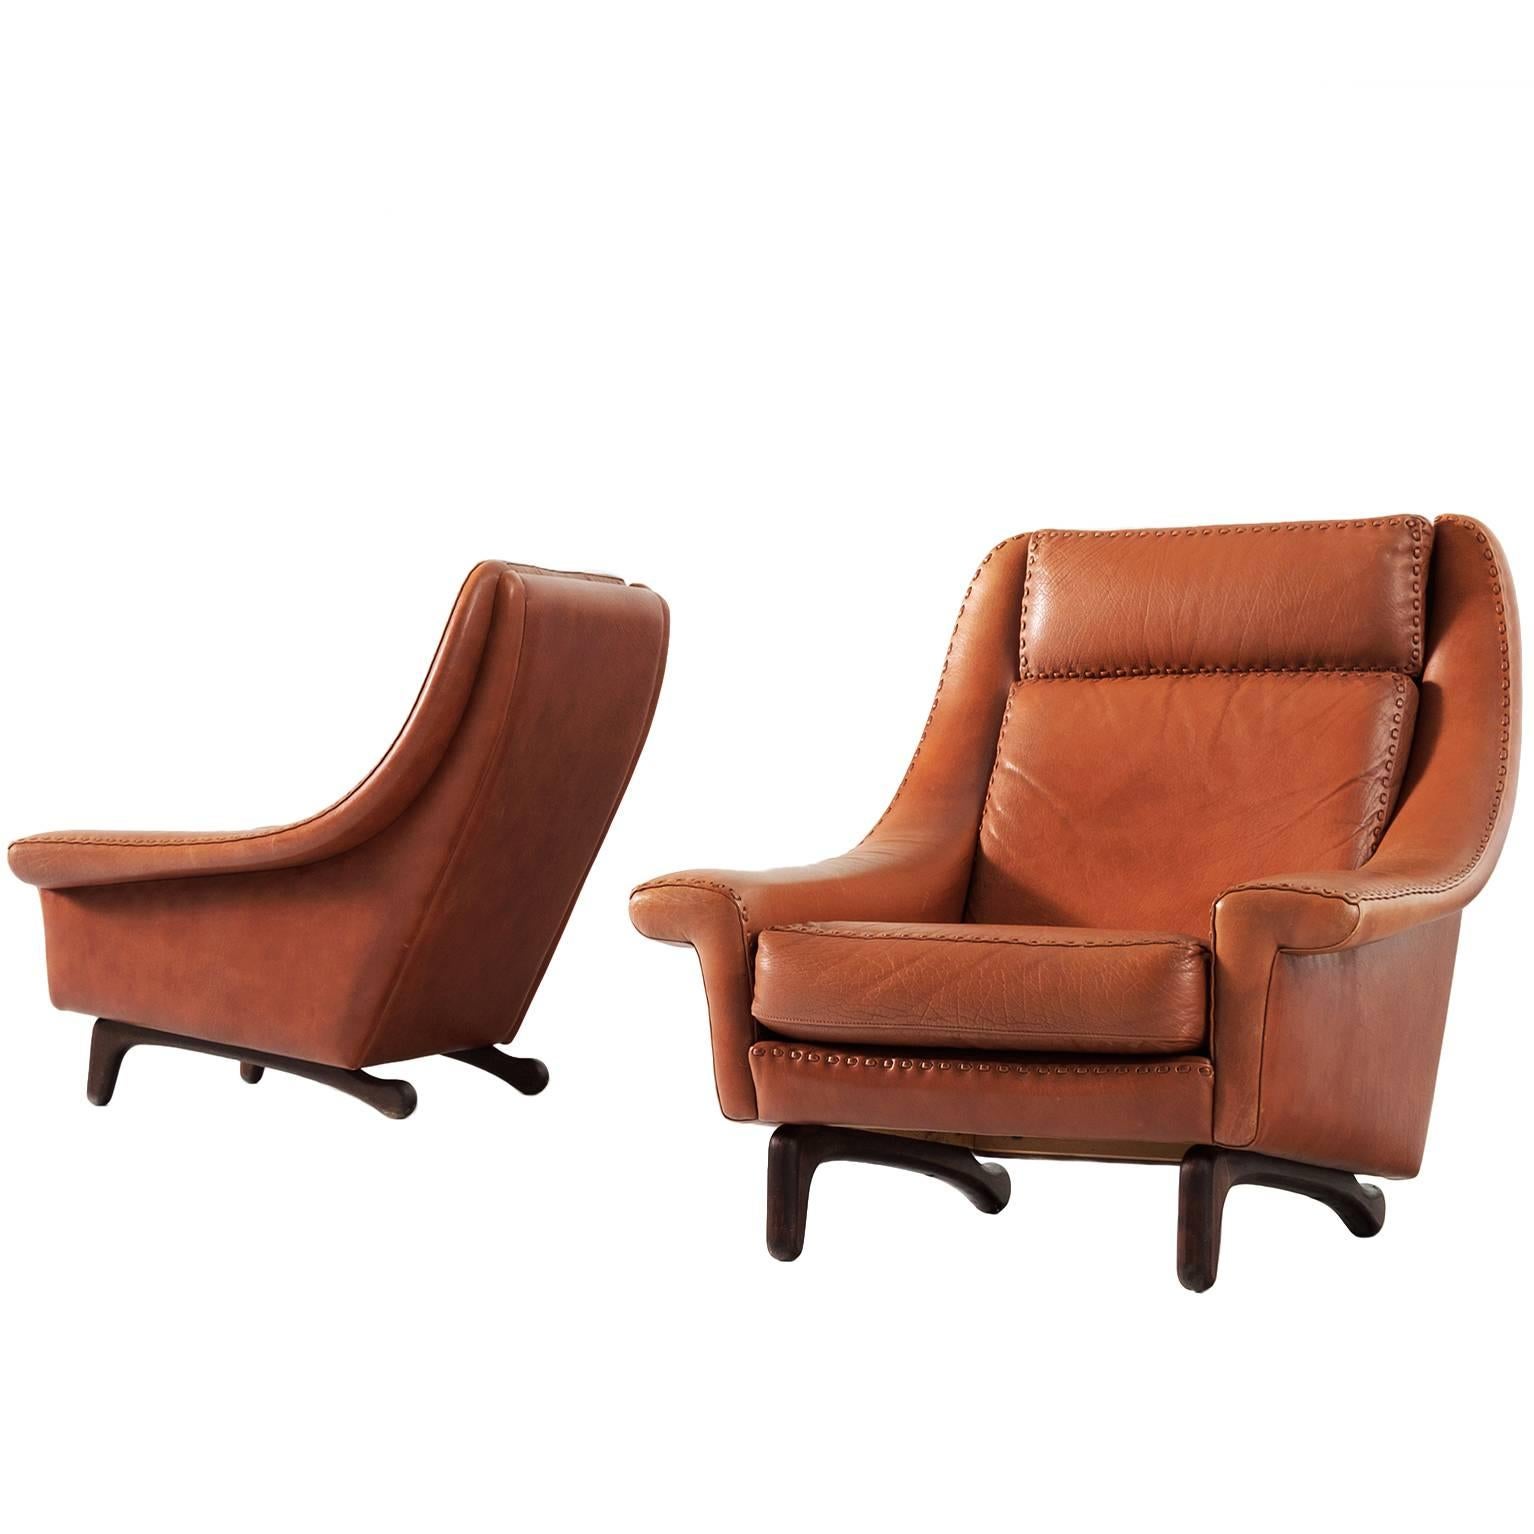 Pair of Scandinavian Lounge Chairs in Cognac Leather